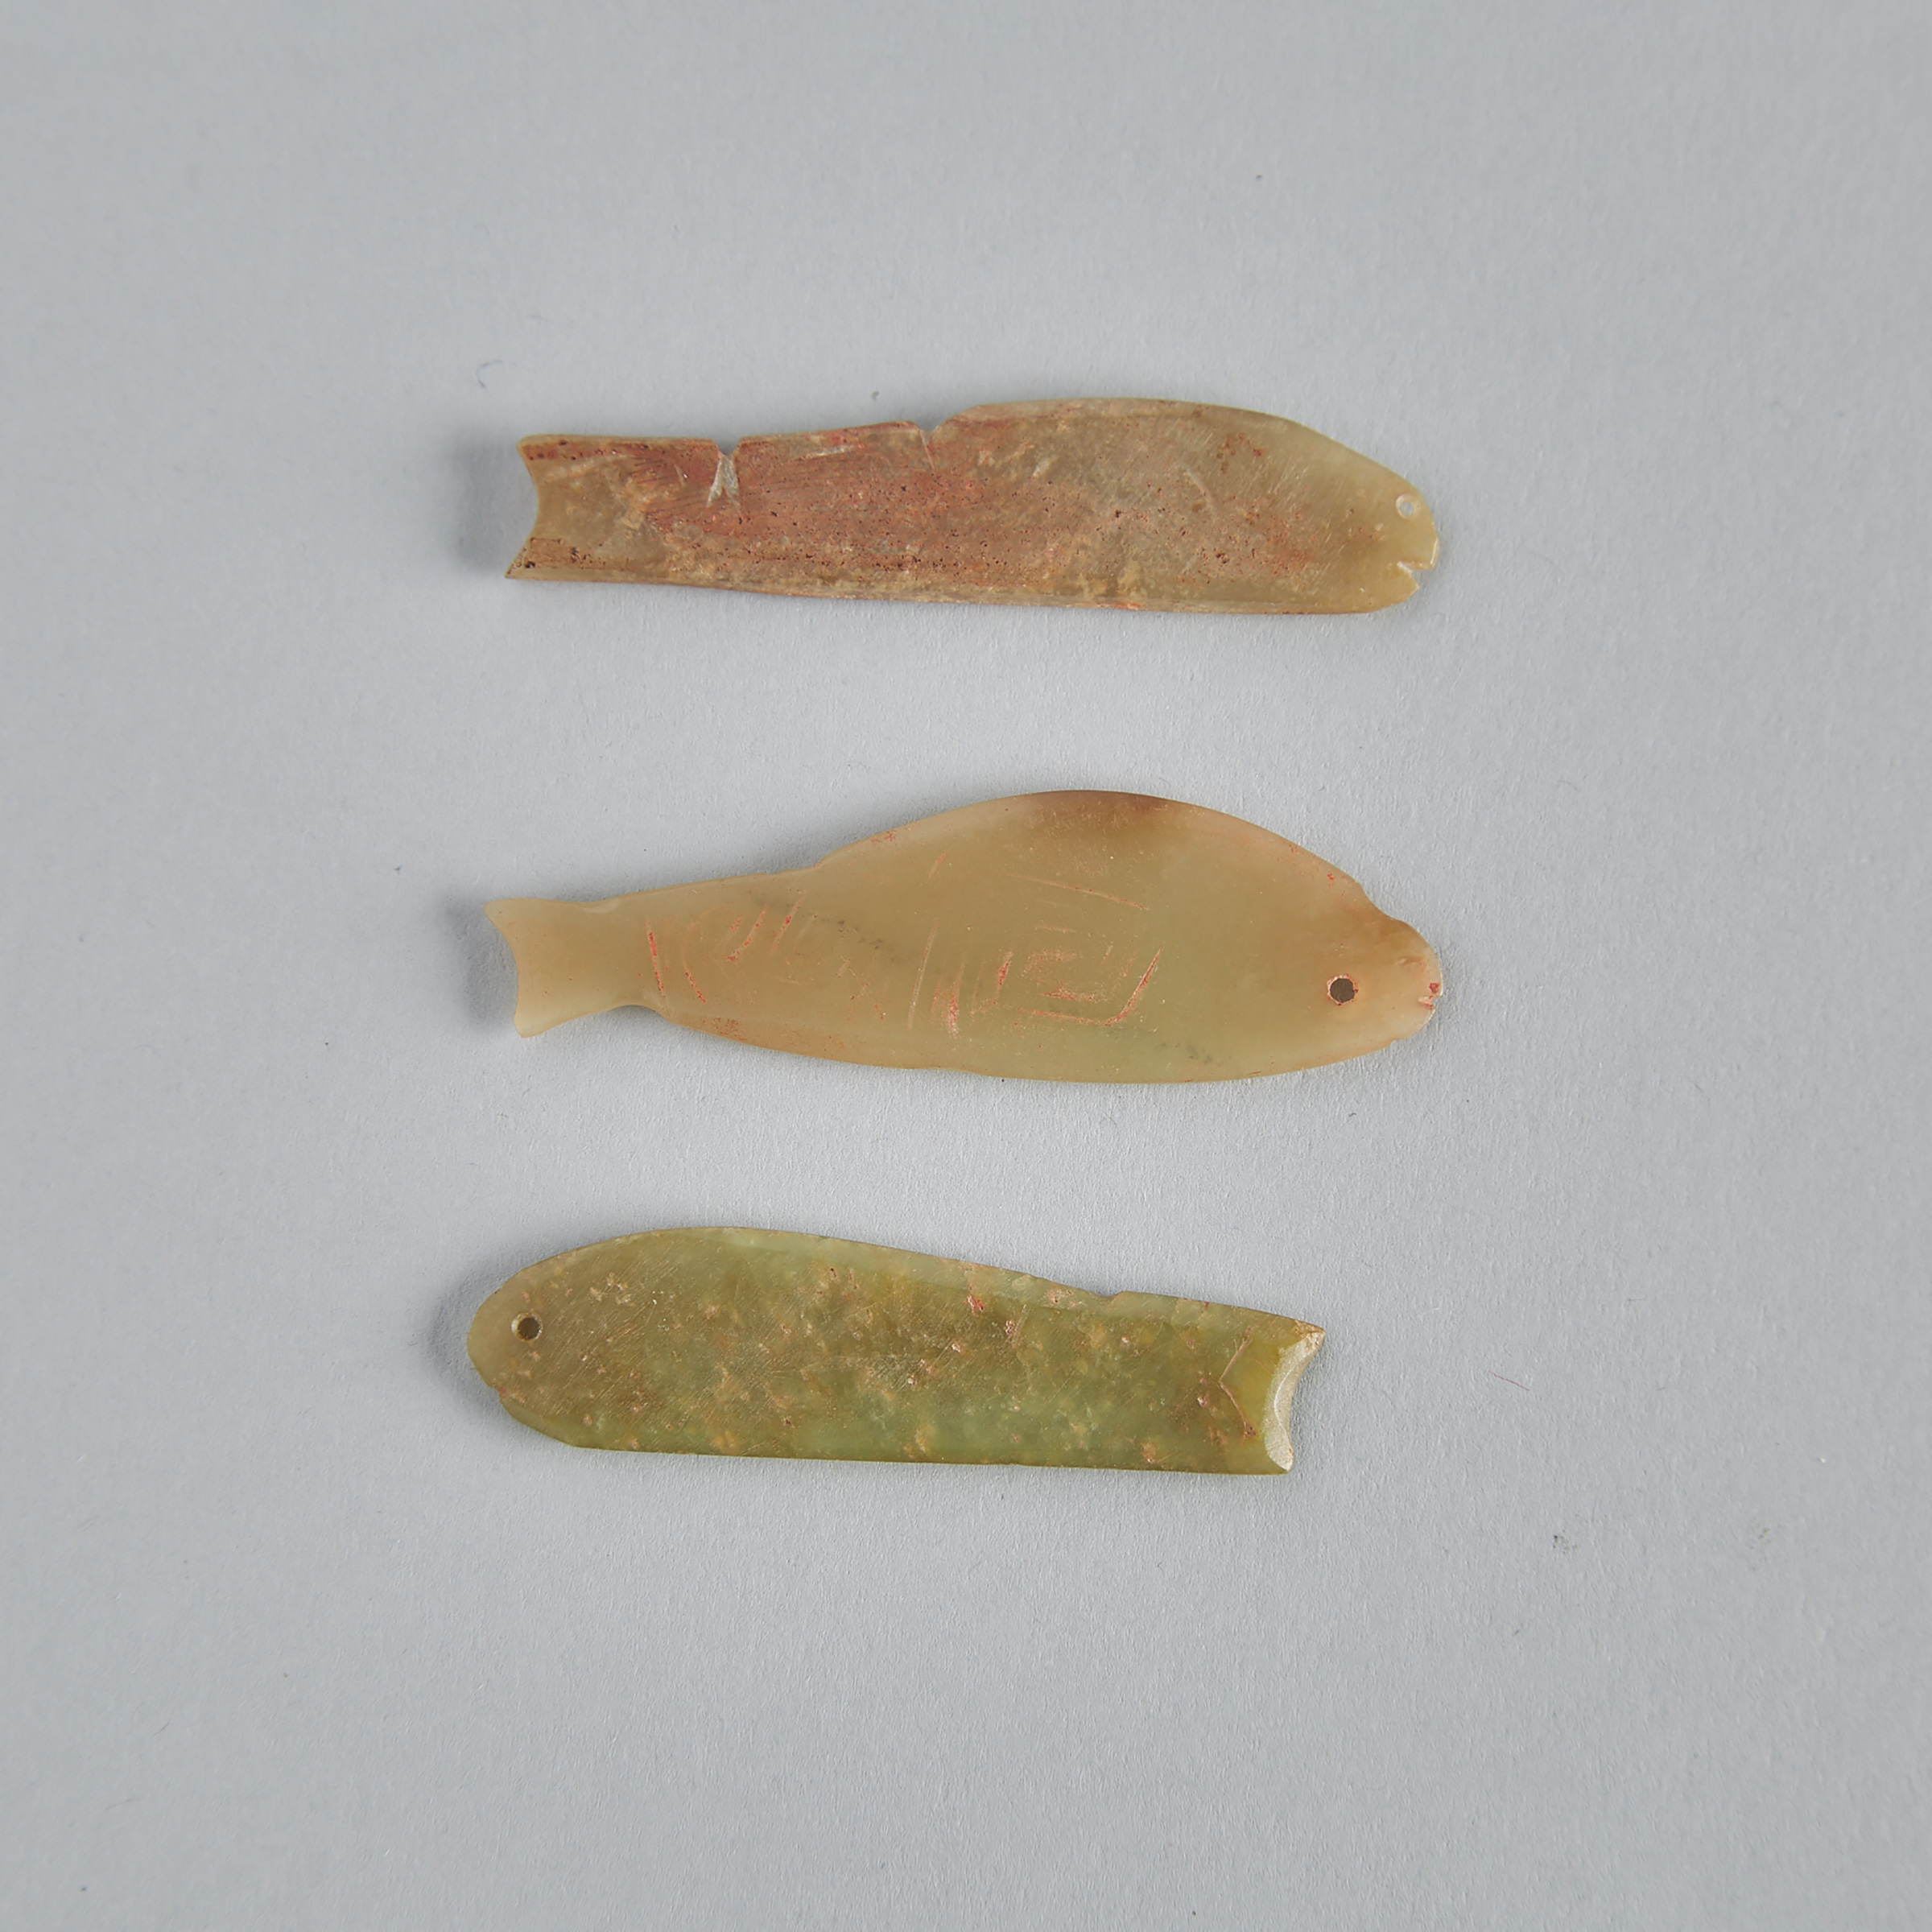 A Group of Three Chinese Jade Fish Form Amulet Pendants, Neolithic Period